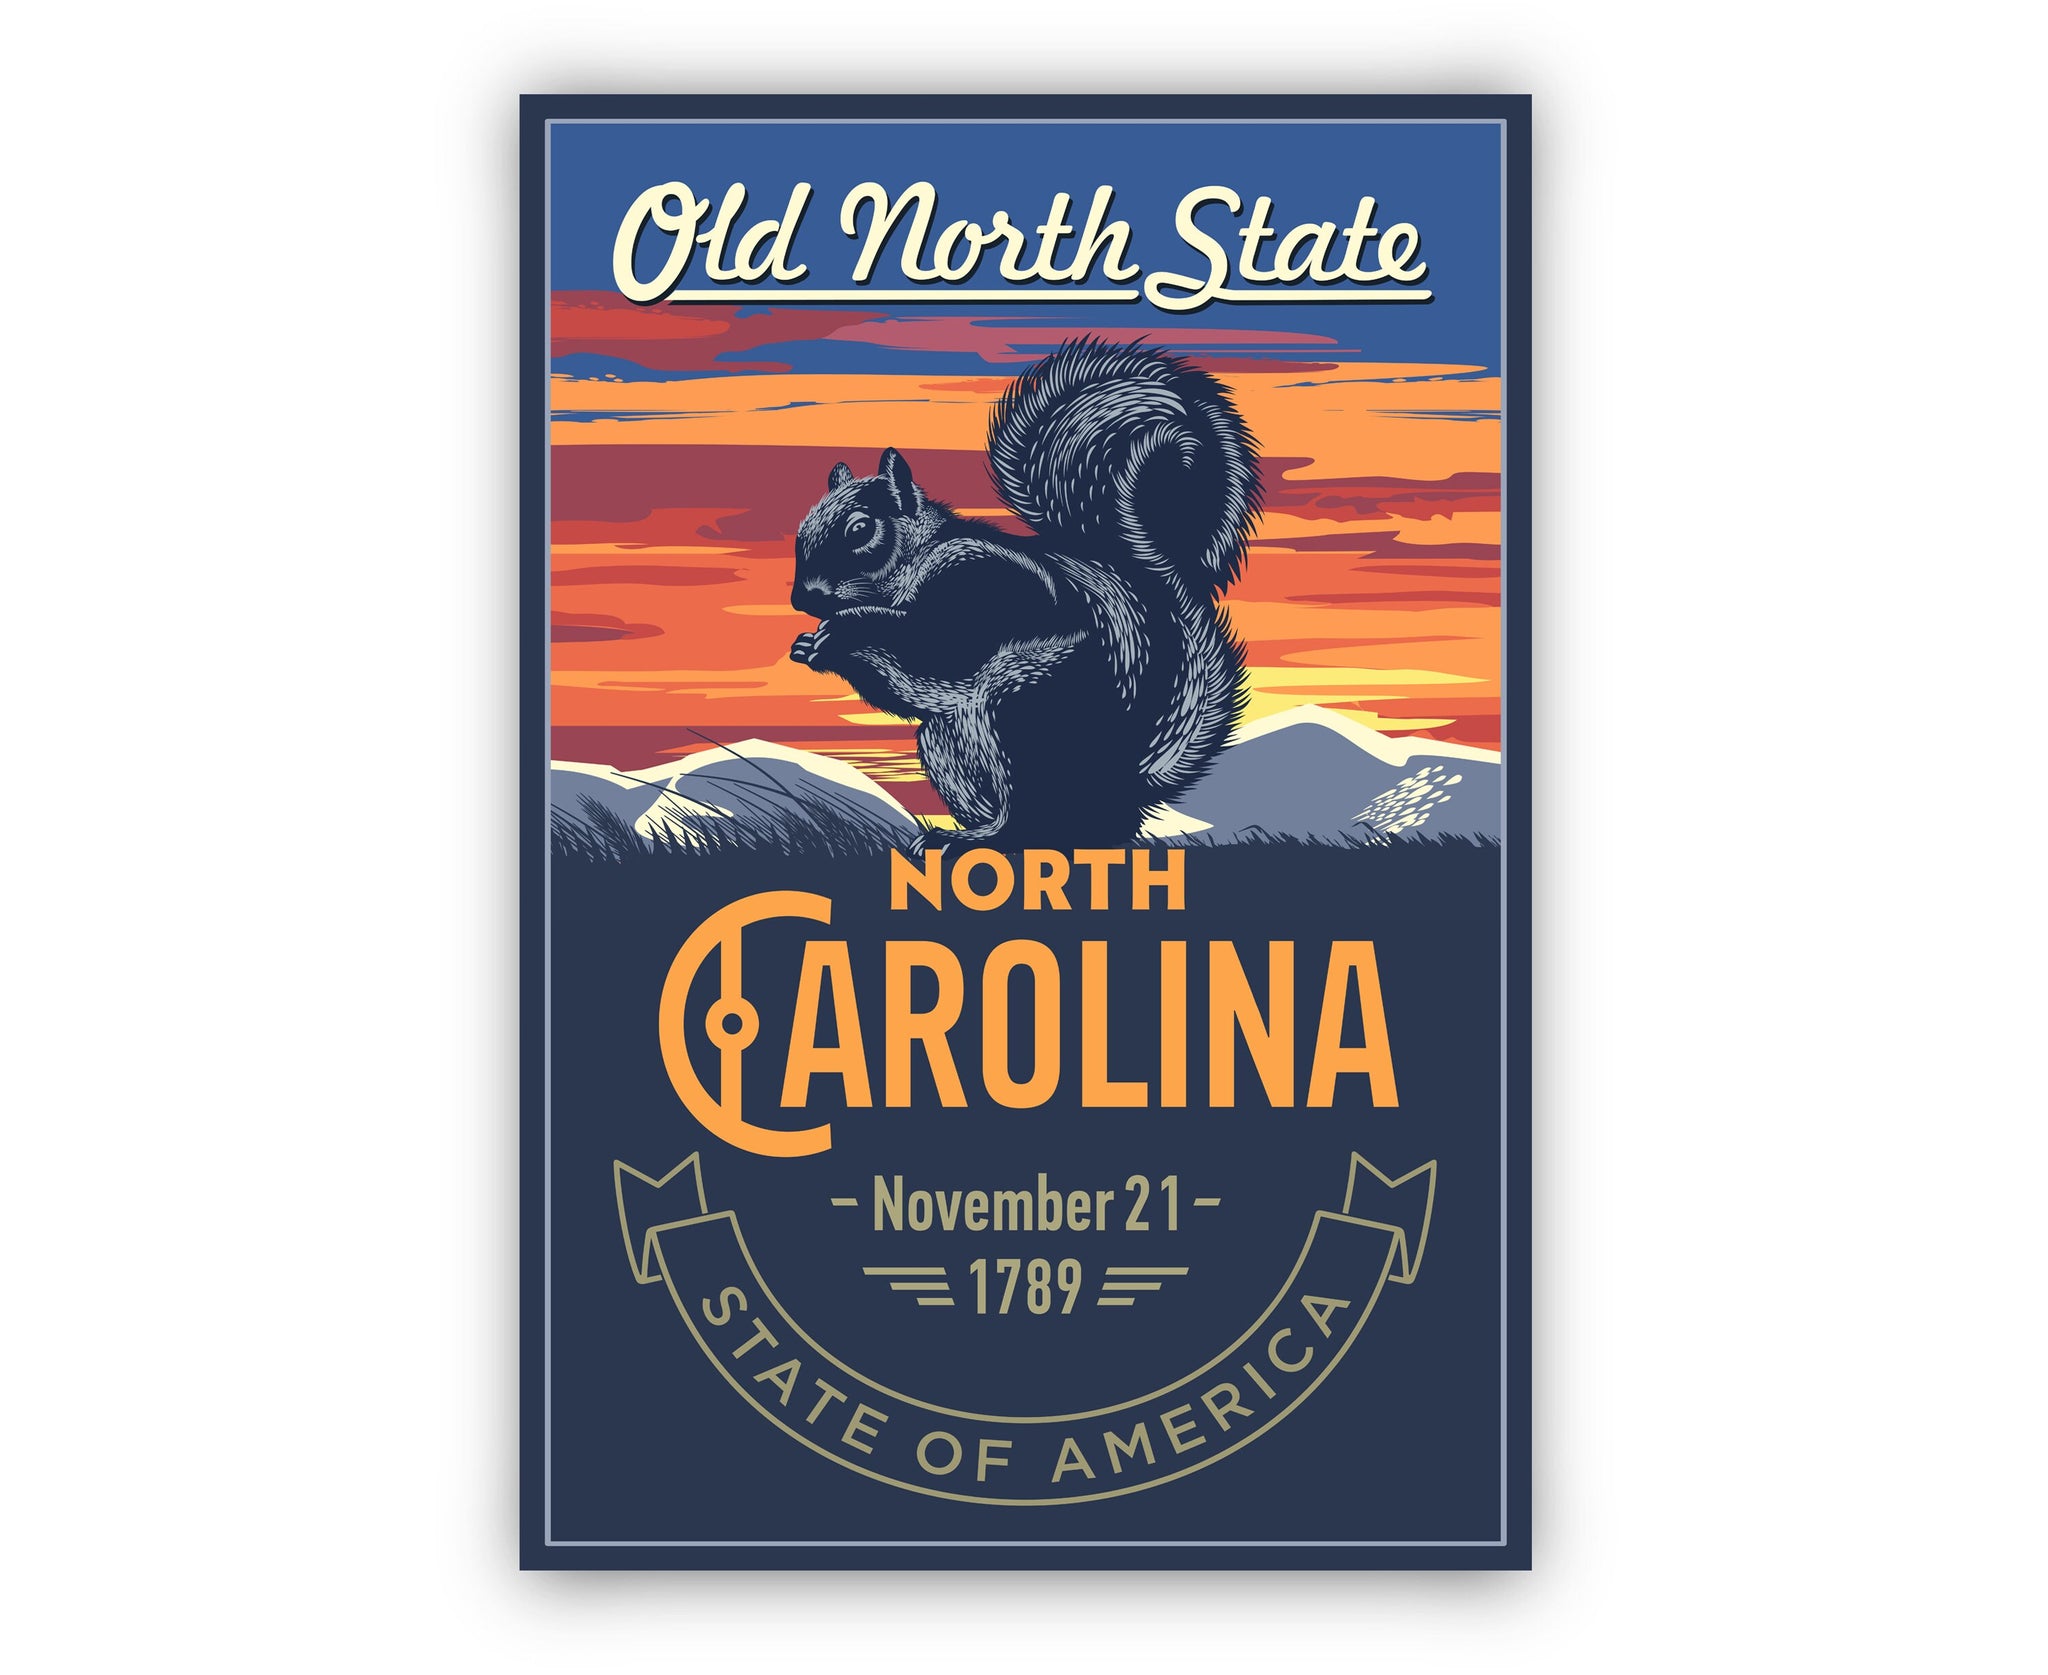 United States Poster, North Carolina State Poster Print, North Carolina State Emblem Poster, Retro Travel State Poster, Home Office Wall Art